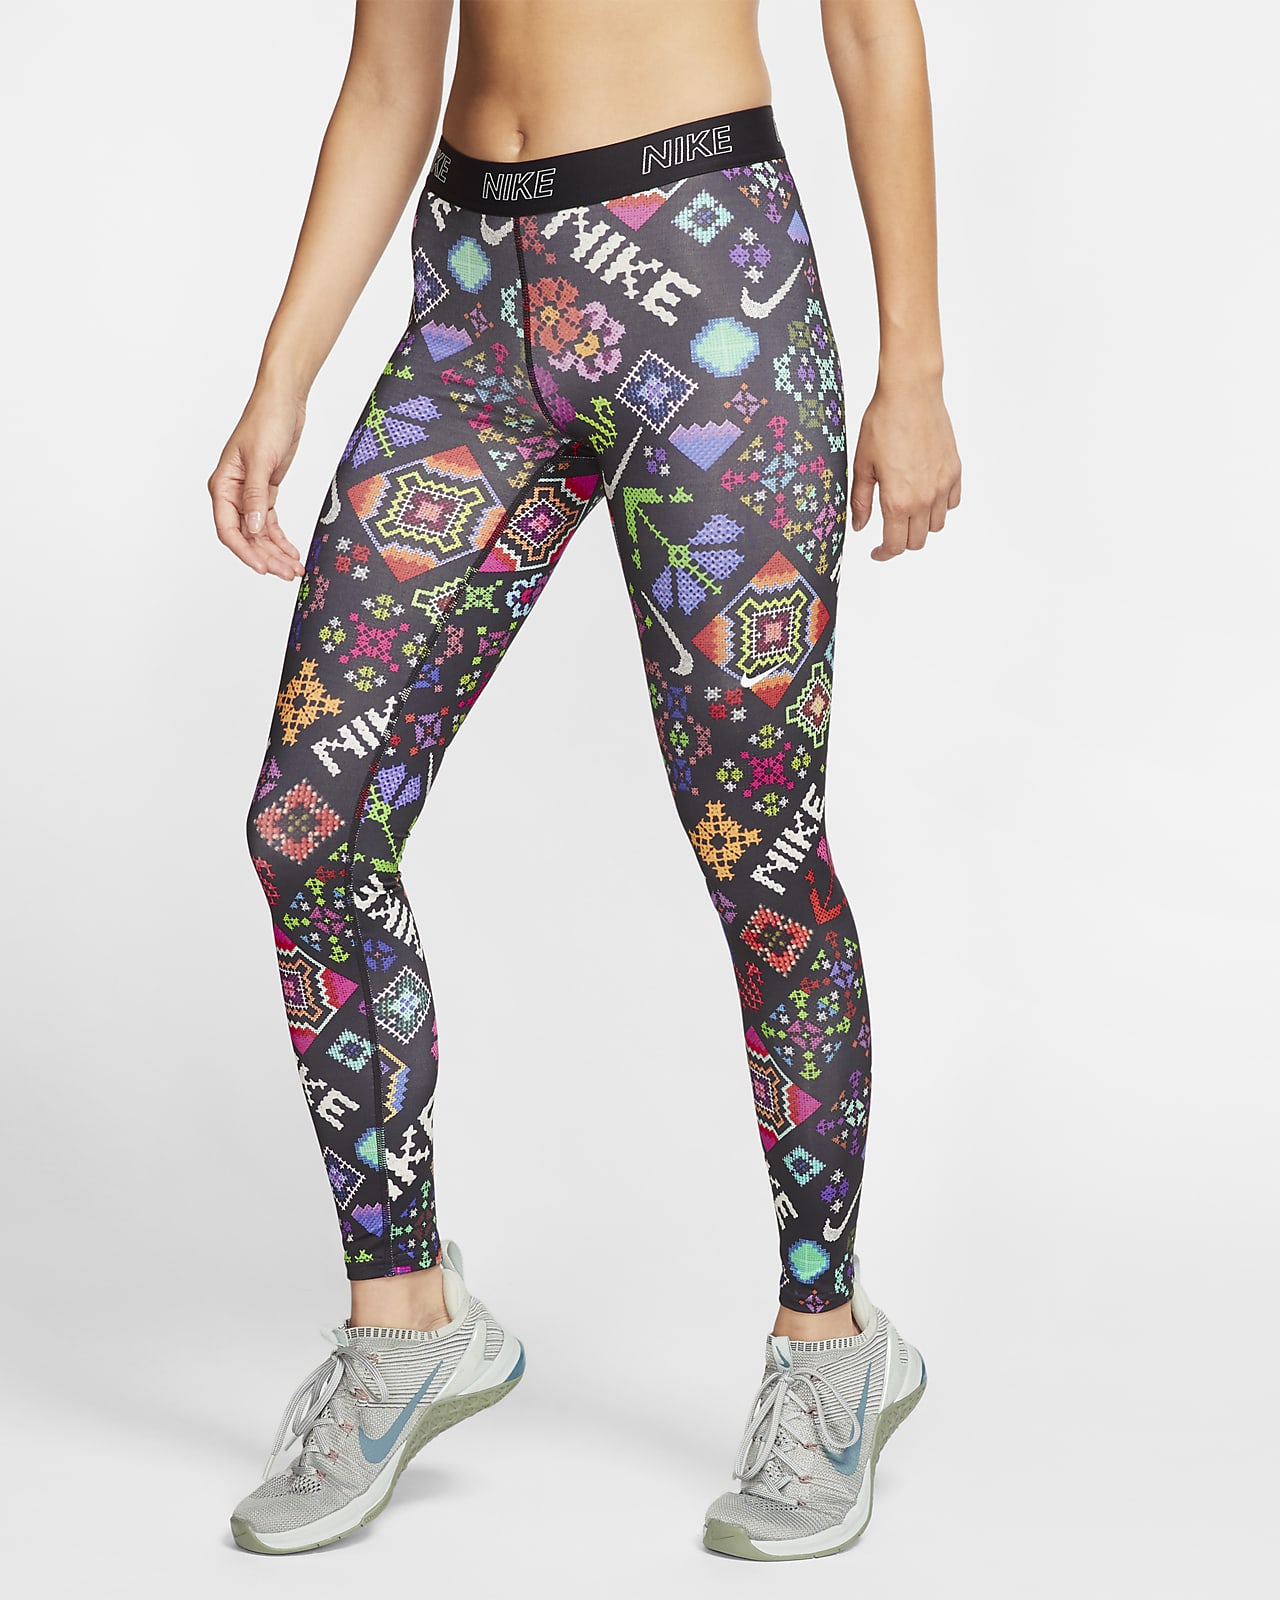 nike victory women's training tights